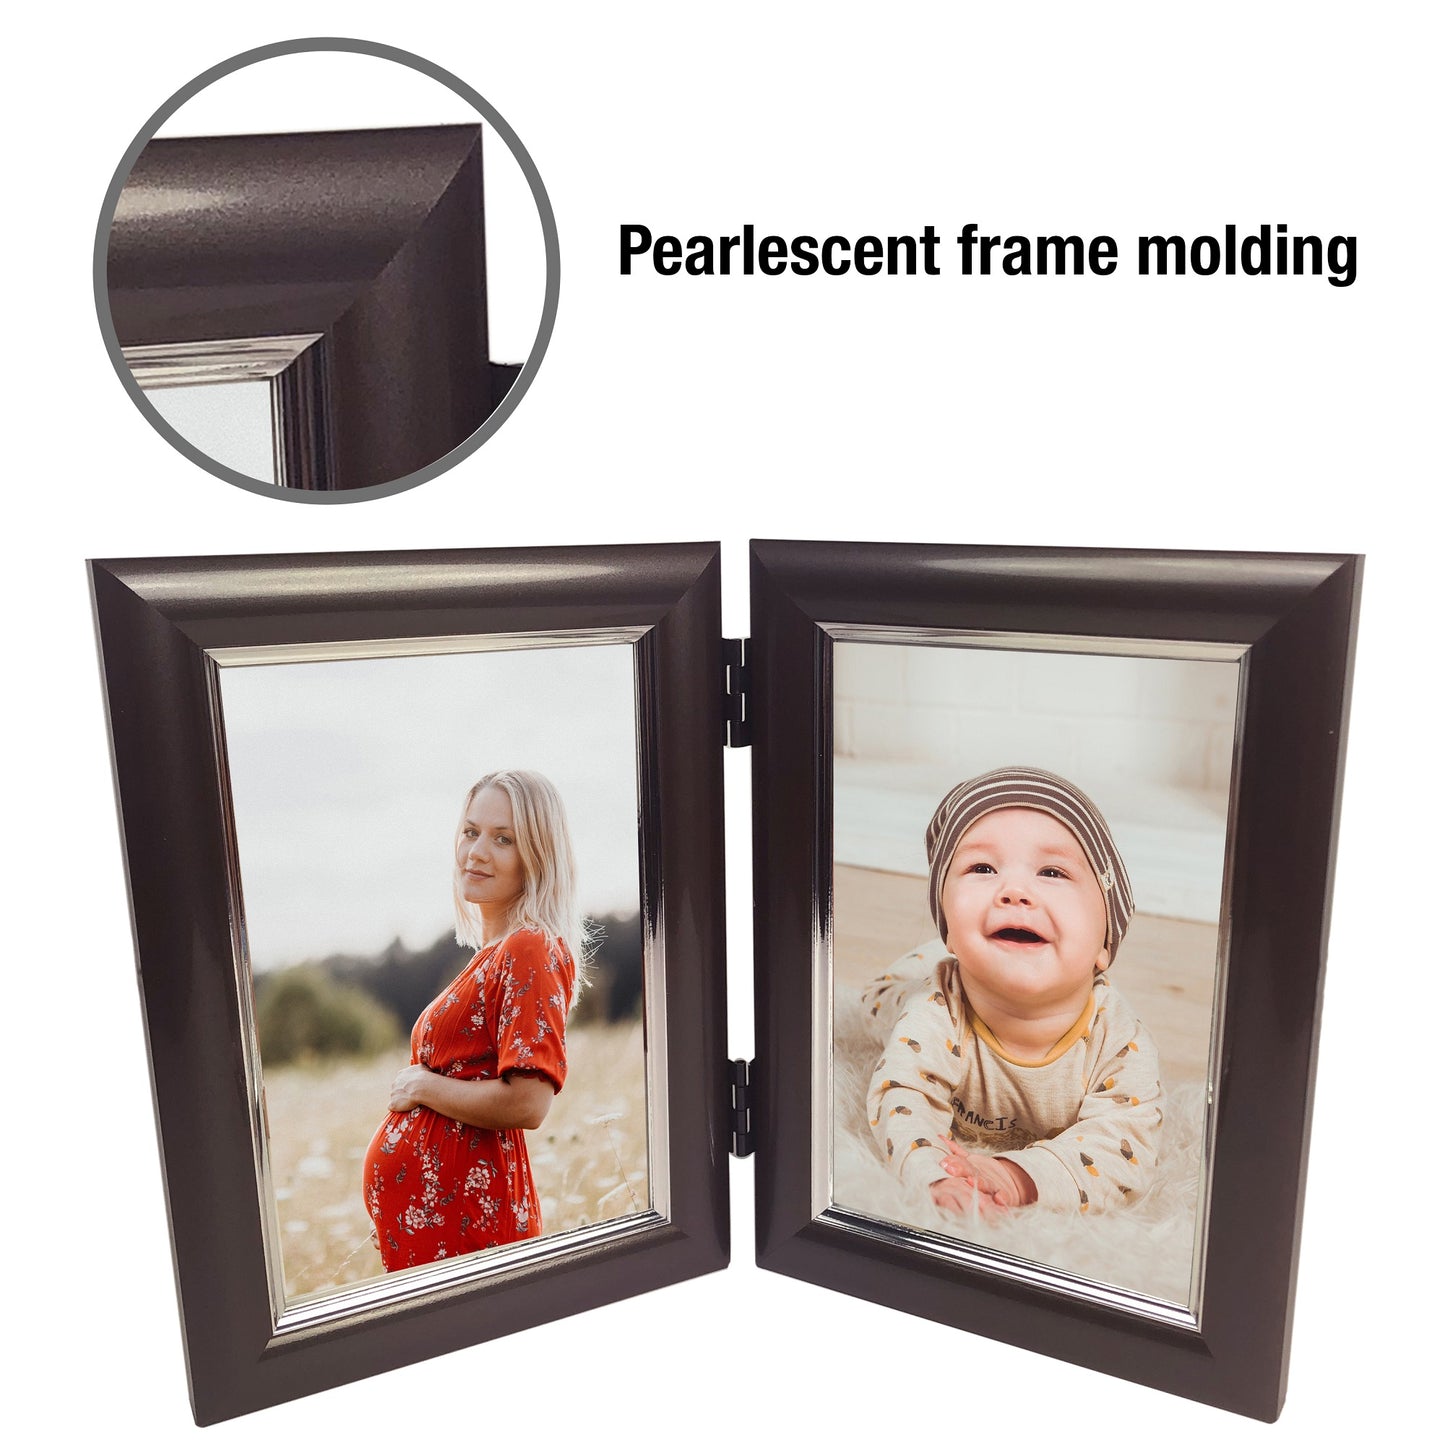 Dual Picture Photo Frame - For 2 4x6" Pictures - Vertical - Easy Insert - Satin Mocha - Table Top Display